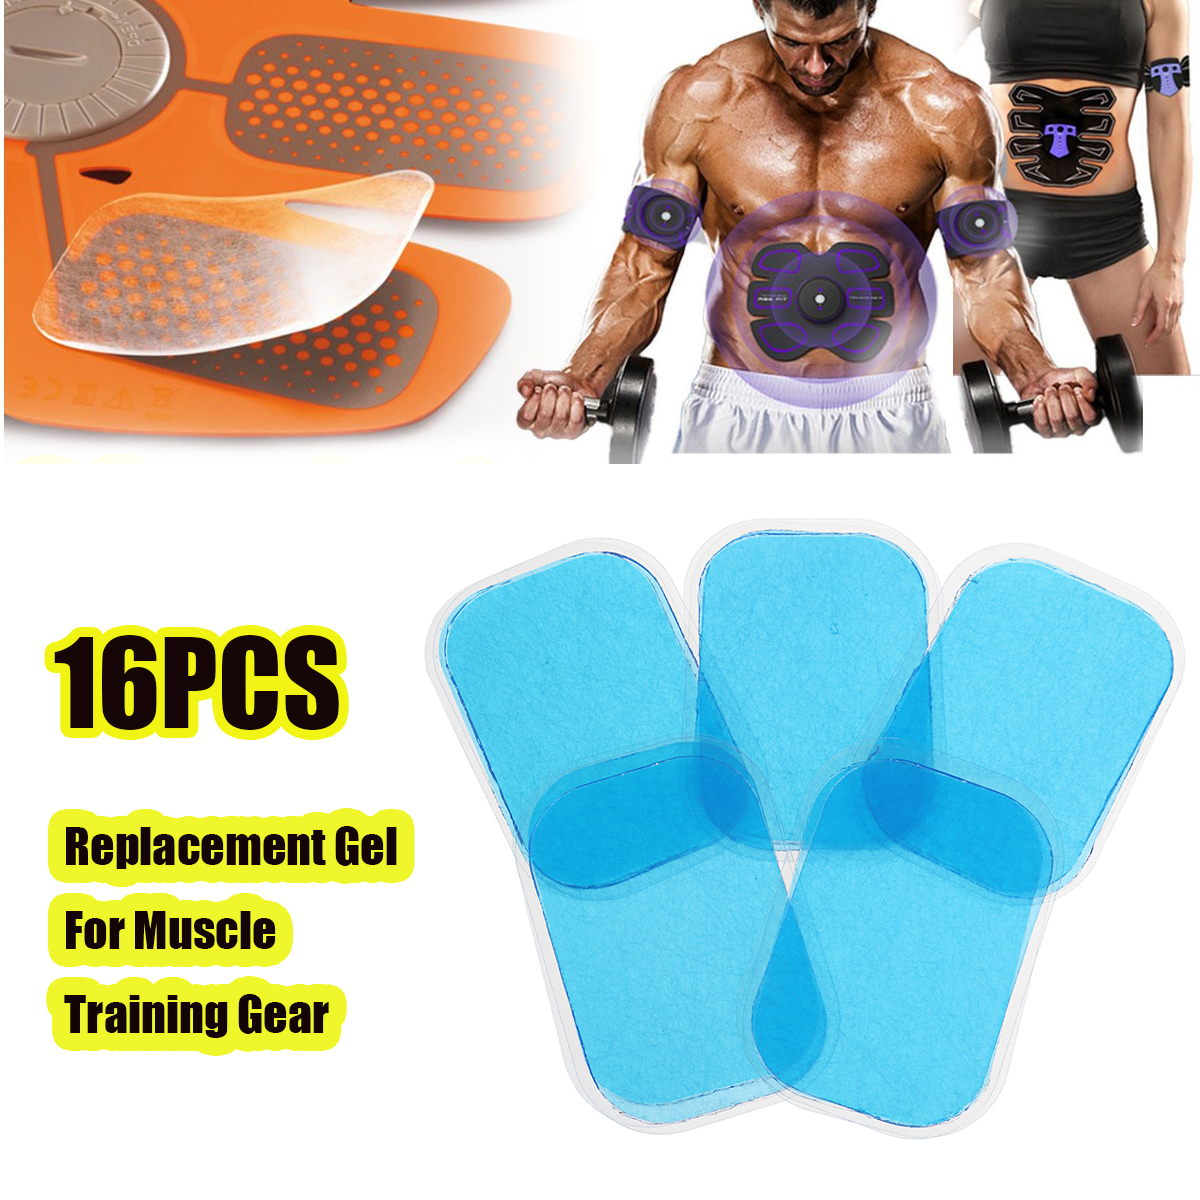 KALOAD-16PCSSet-Blue-Replacement-Gel-For-Abdominal-Muscle-Training-Pads-Gear-Fitness-Massage-1418270